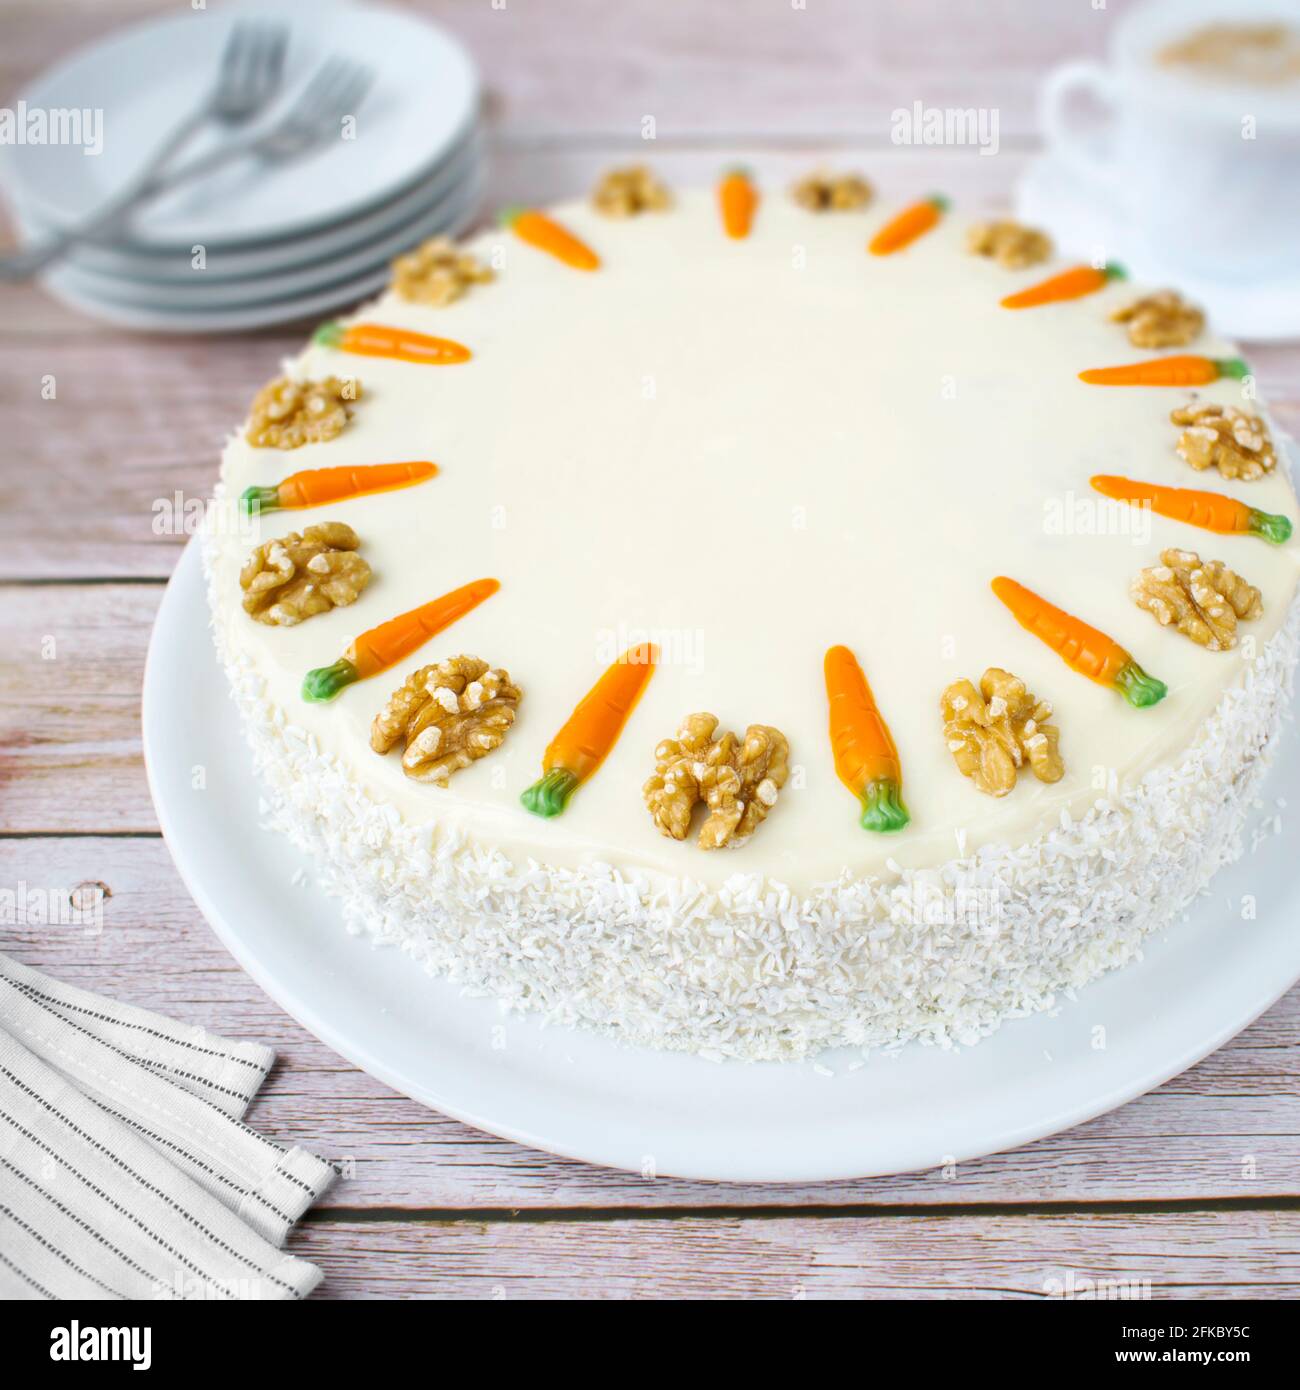 Homemade carrot cake with coconut cream. Structured cake with walnuts, pineapple and coconut flakes on a wood background. Stock Photo